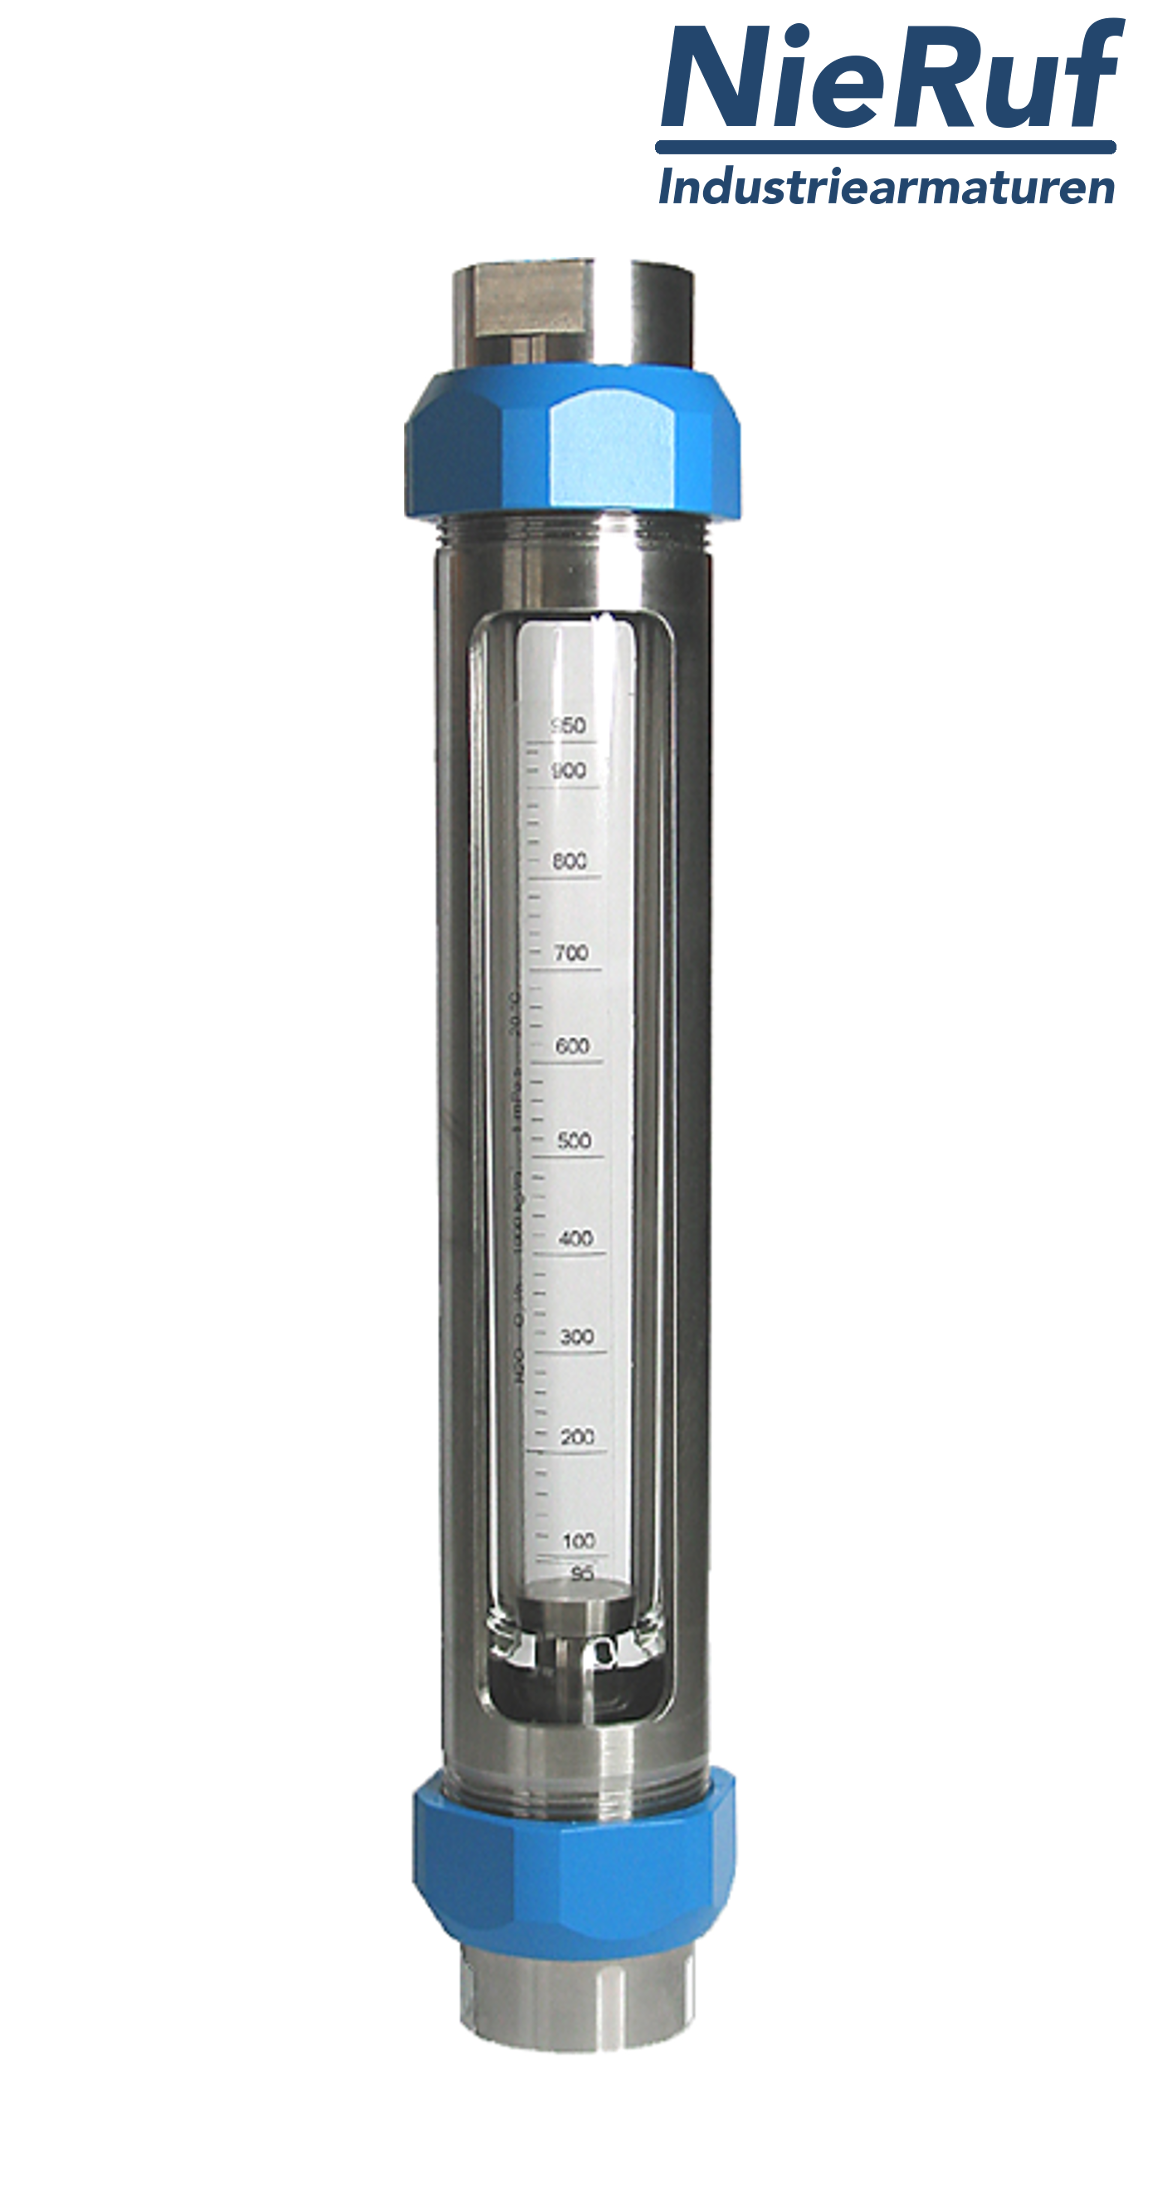 Variable area flowmeter stainless steel + borosilicate 2" inch 160000.0 - 430000.0 l/h air EPDM